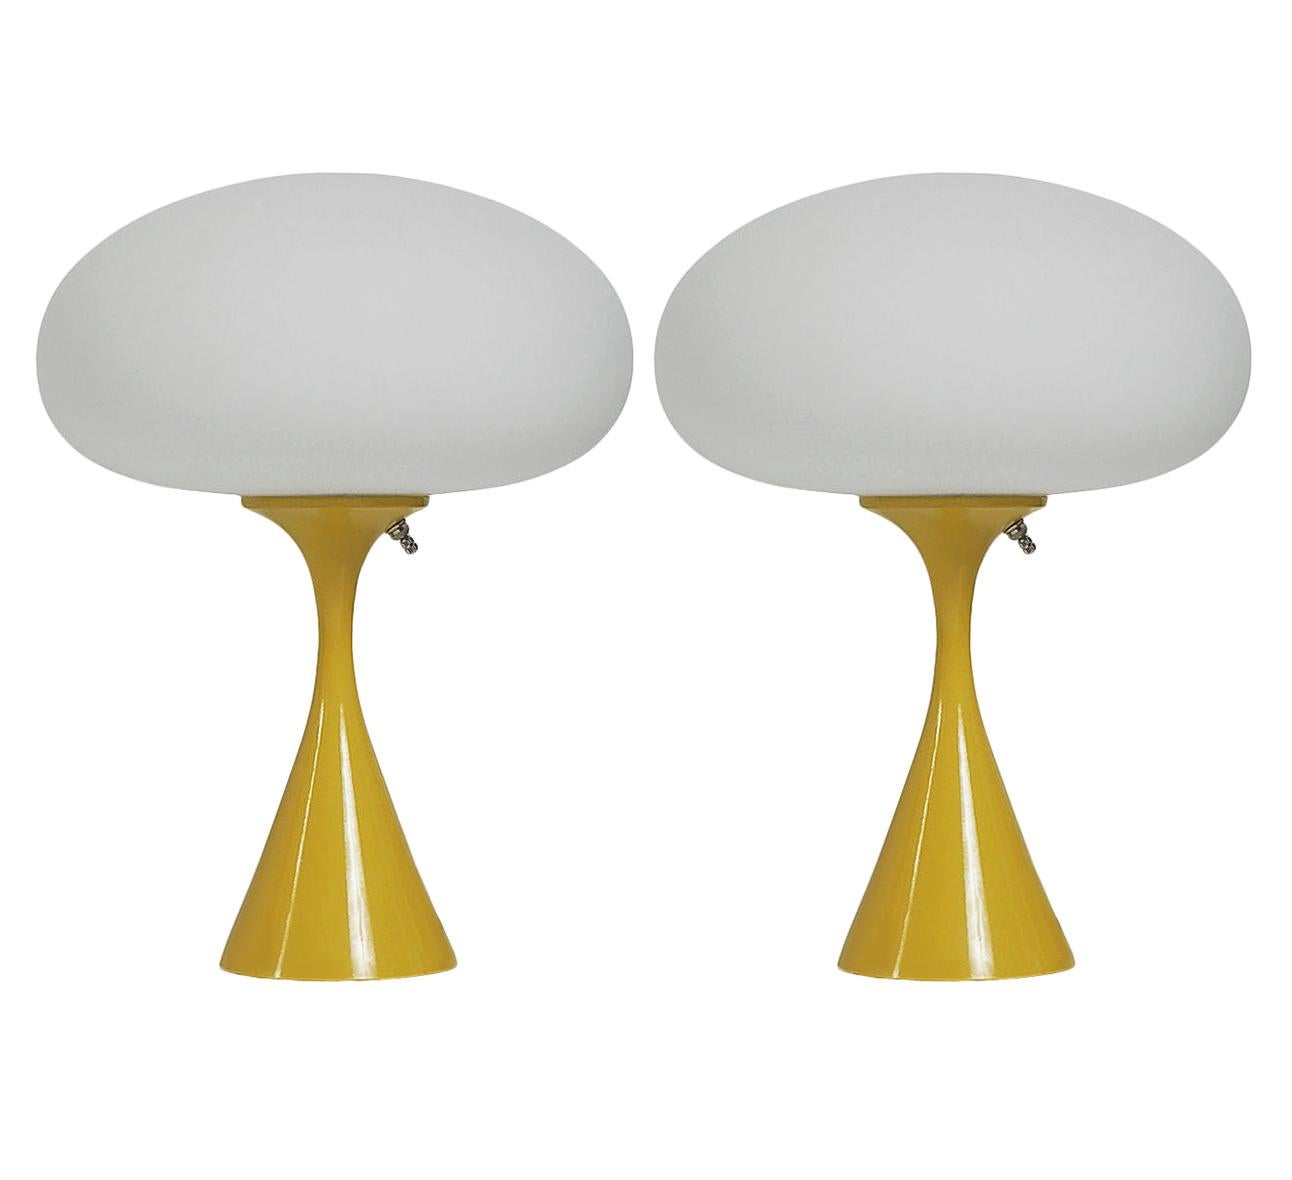 Contemporary Pair of Mid-Century Modern Table Lamps by Designline in Yellow & White Glass For Sale